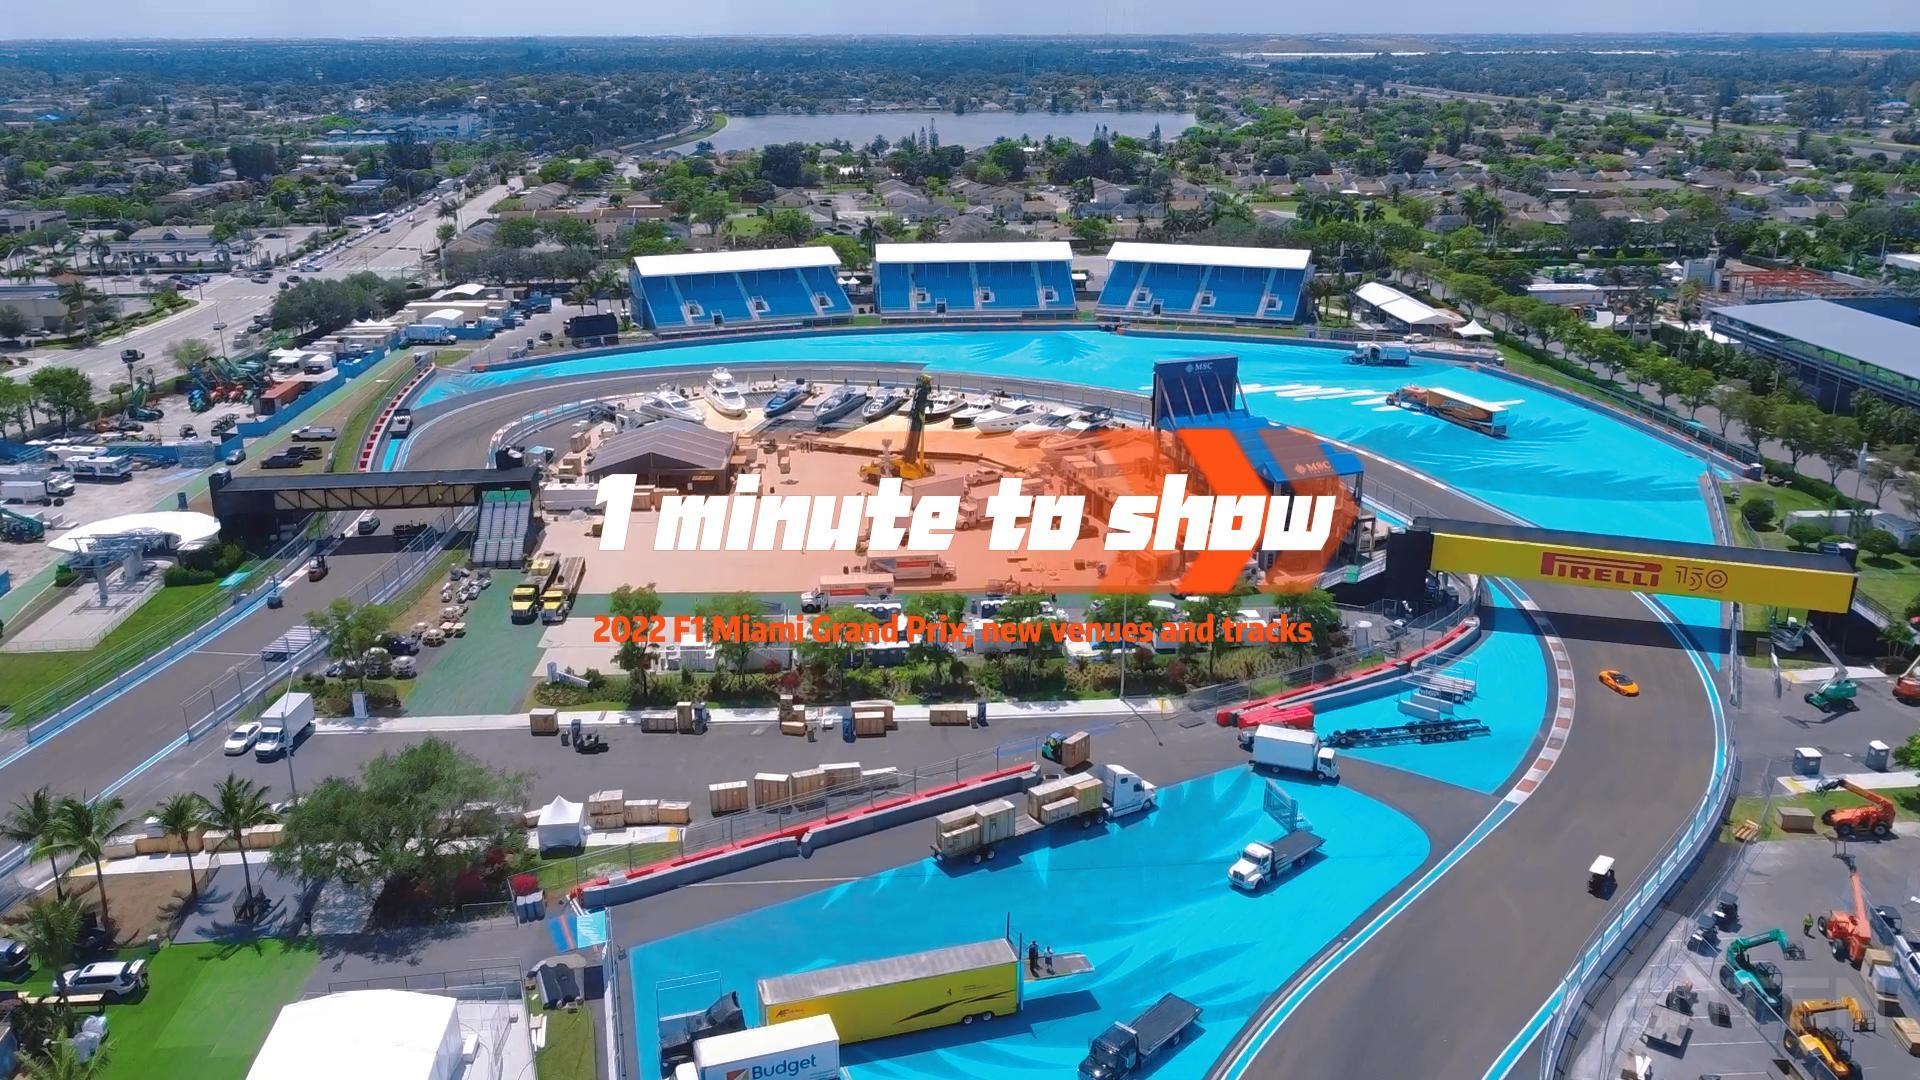 1 minute to show you the 2022 F1 Miami Grand Prix - outdoor sports tent